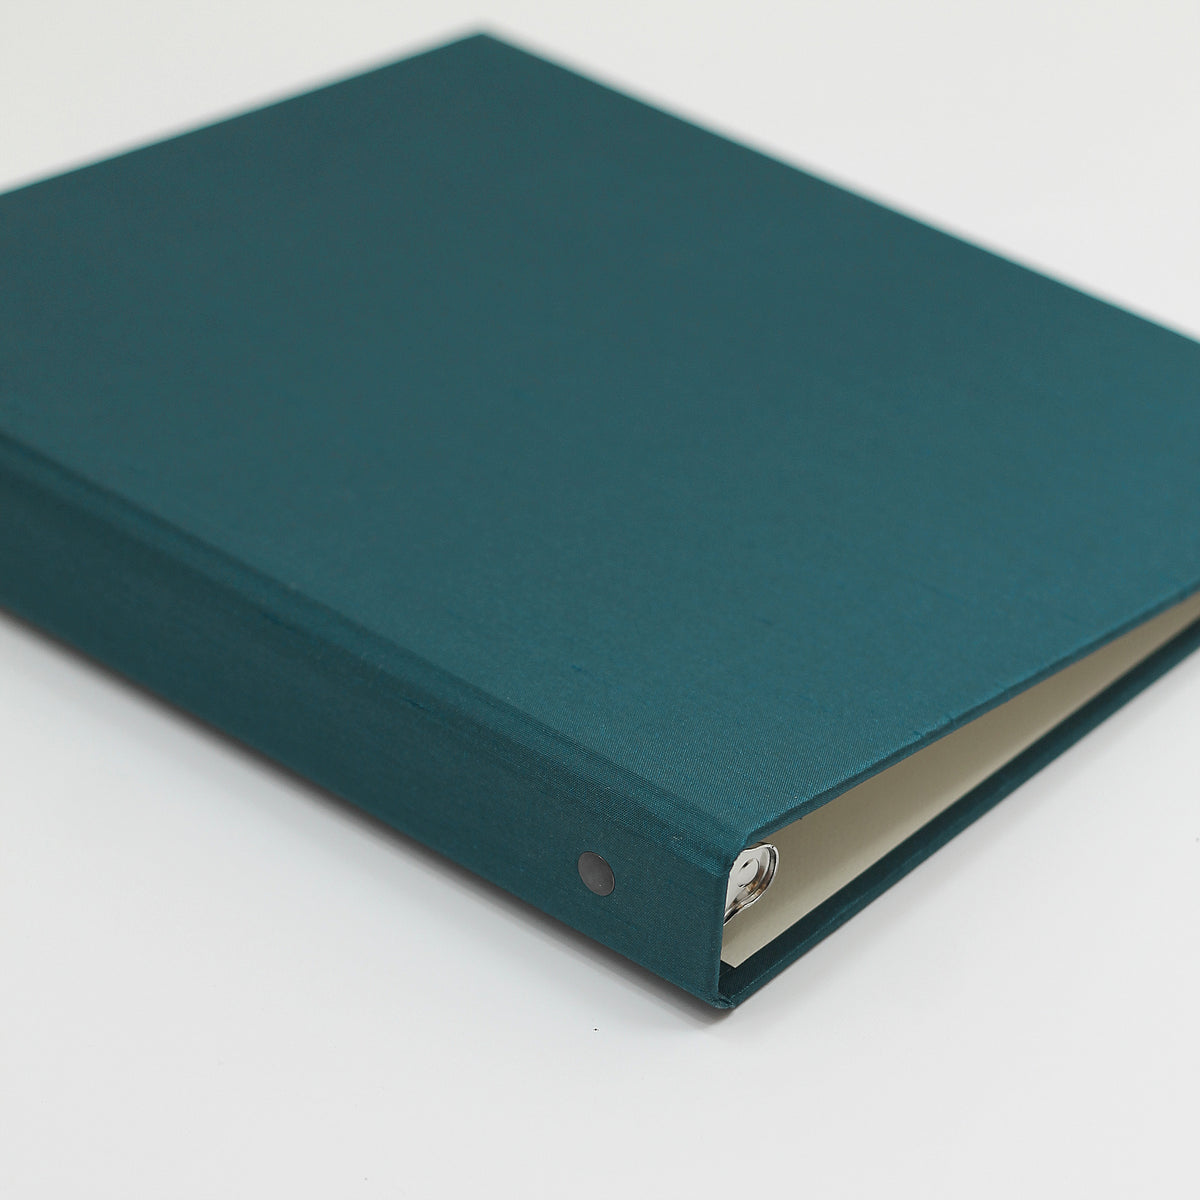 Welcome Binder with Teal Blue Silk Cover | Home | Air BNB